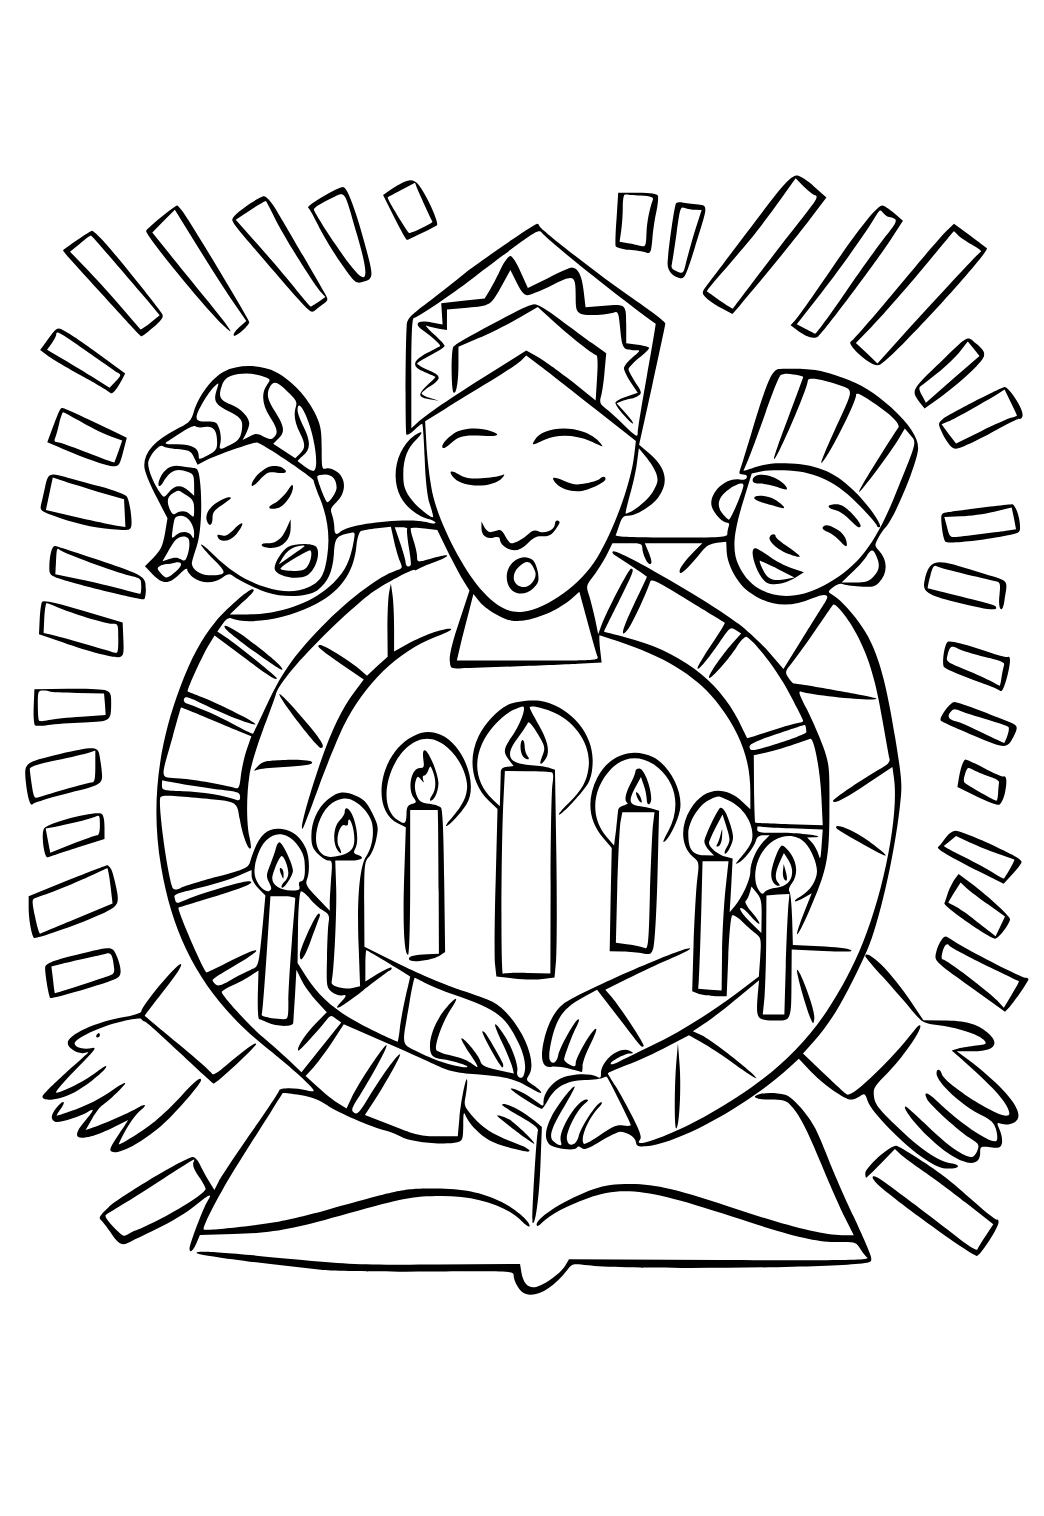 Free printable kwanzaa book coloring page for adults and kids